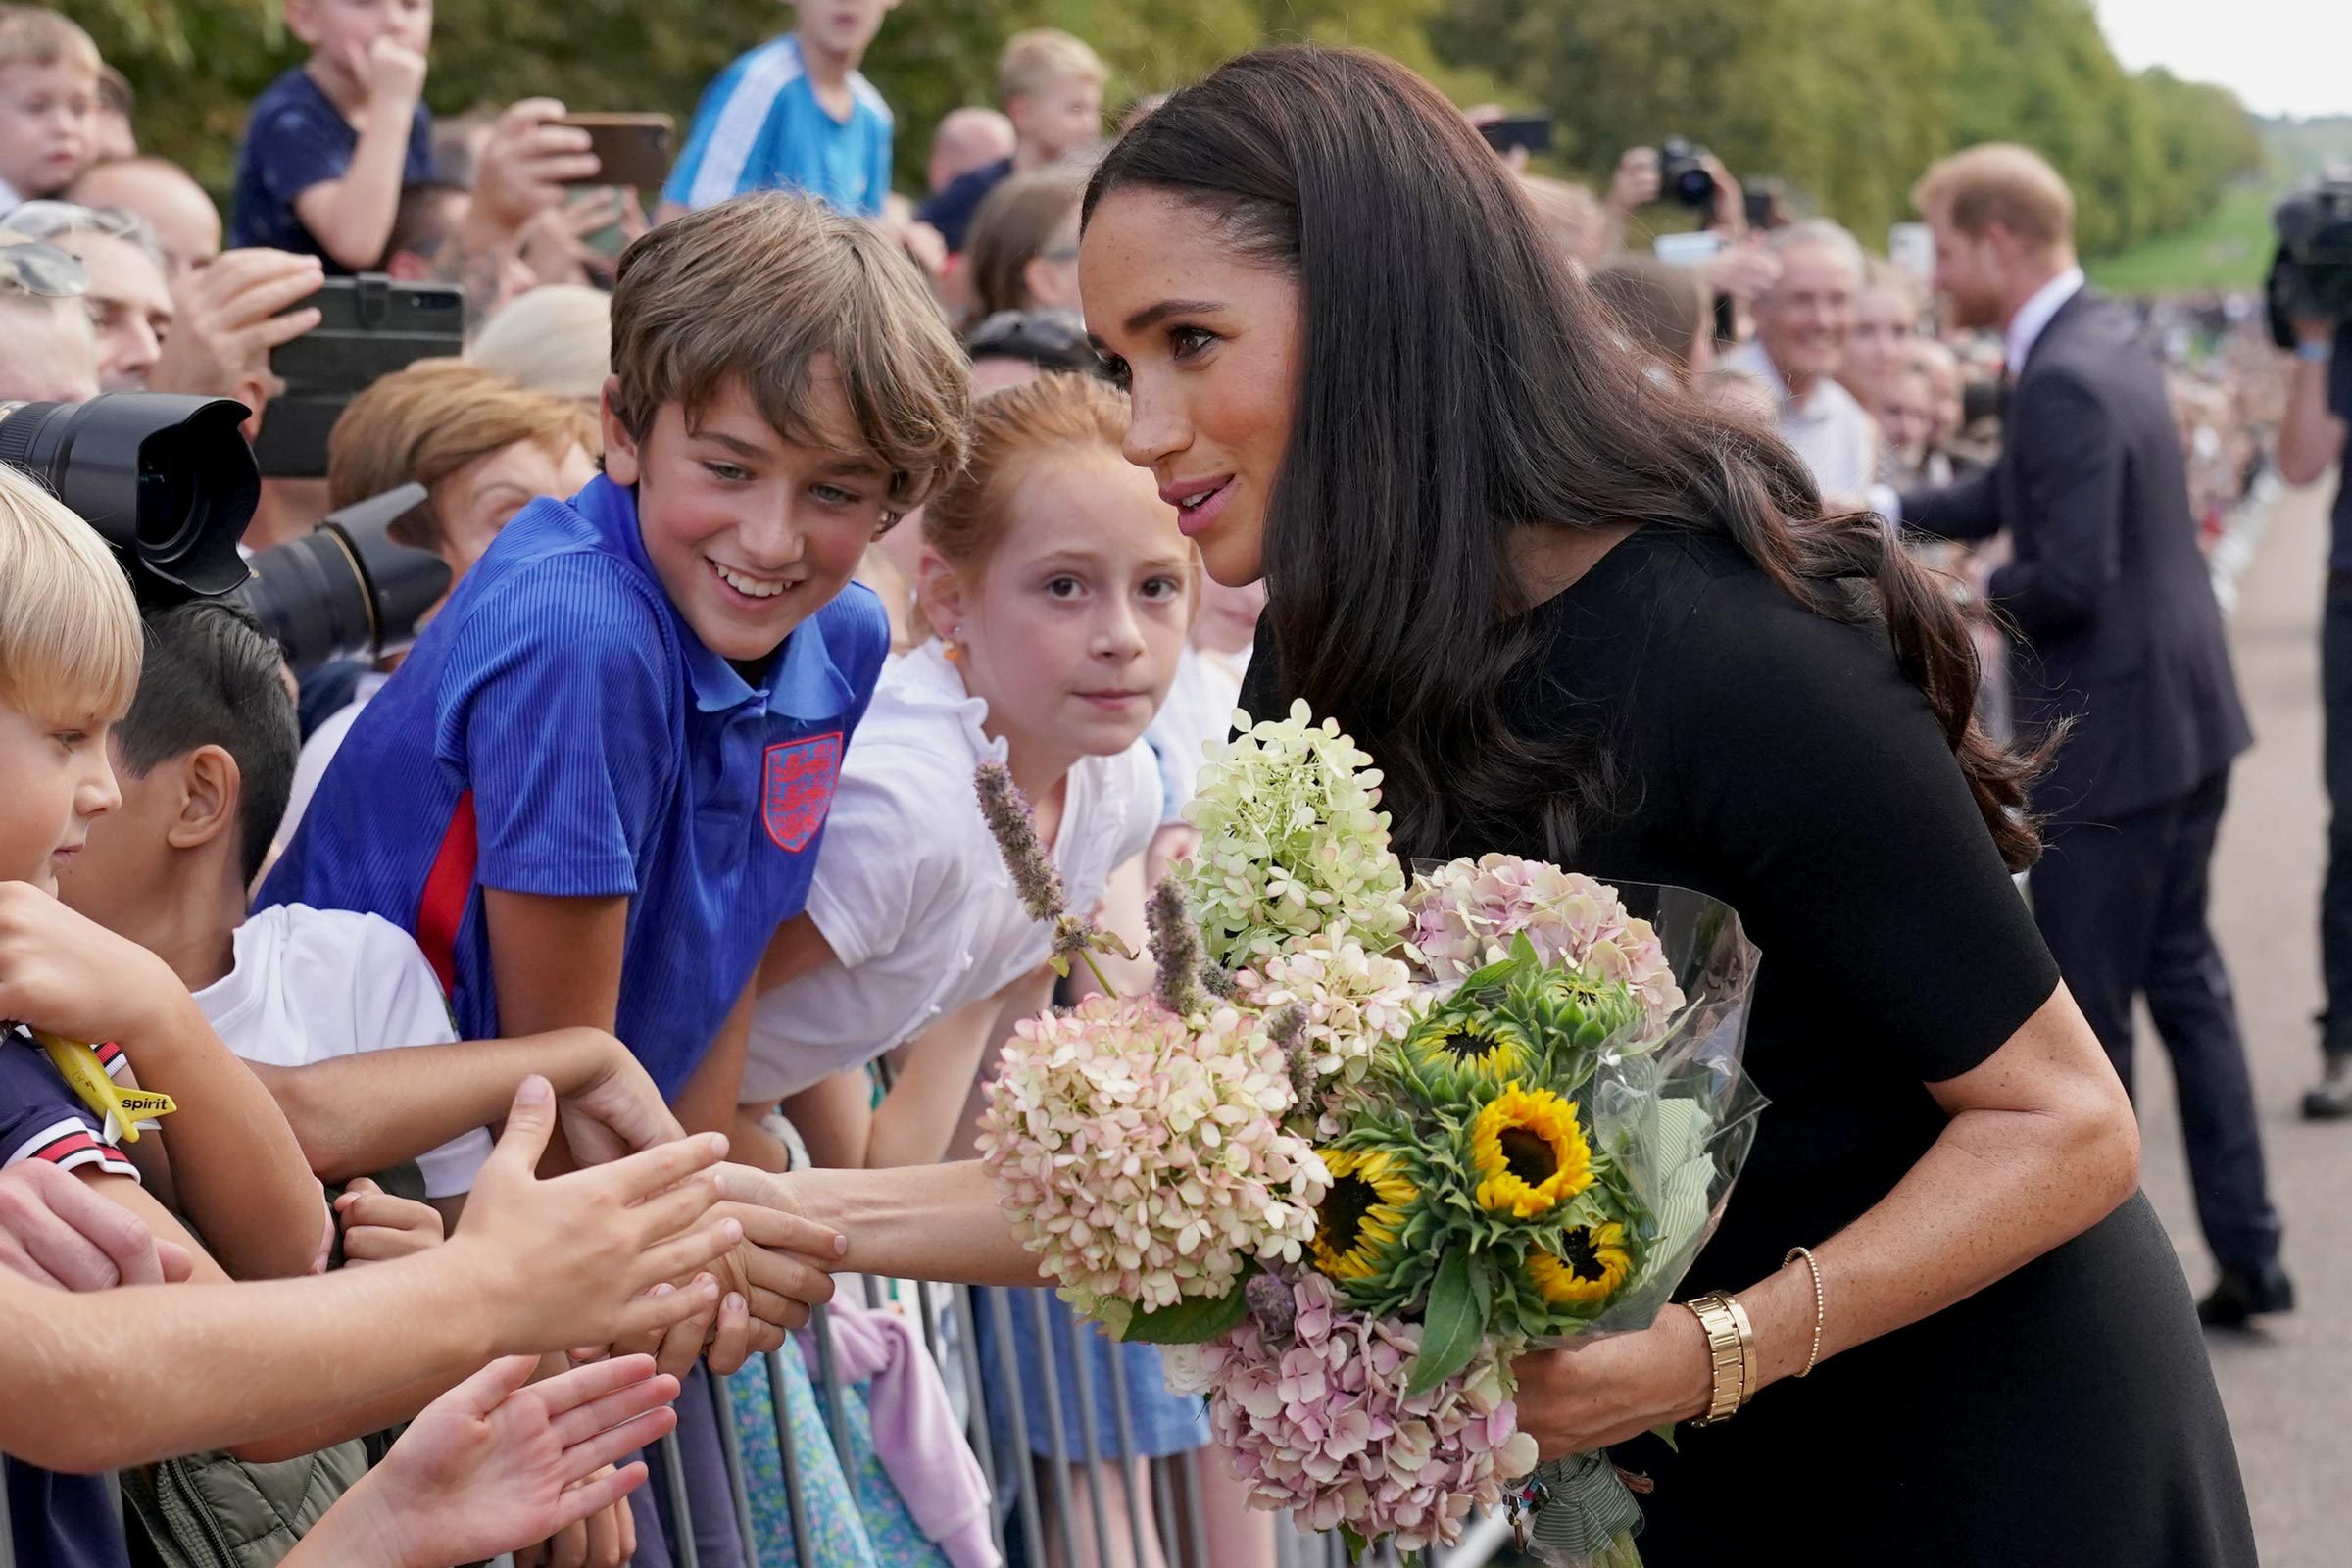 Duchess Meghan Markle's 11 Quiet Habits That Help Her "Survive and Thrive" in Royal Life